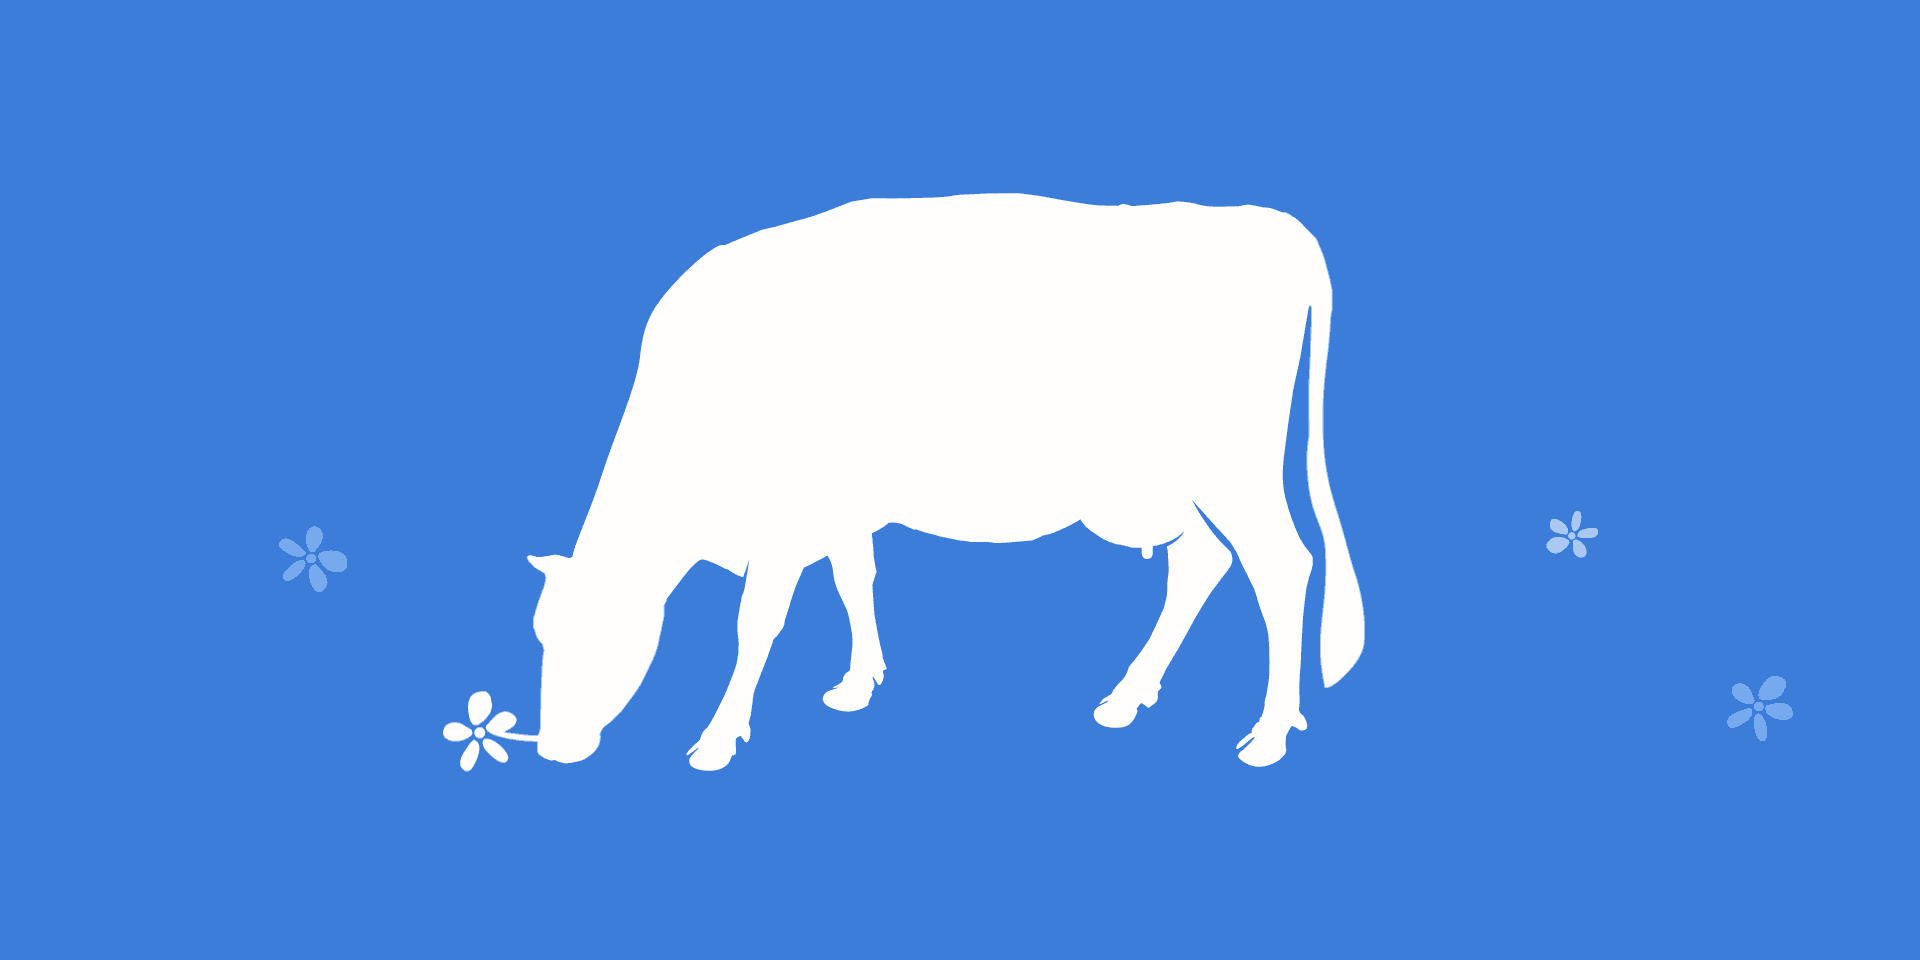 Cow on a blue background eating flowers.